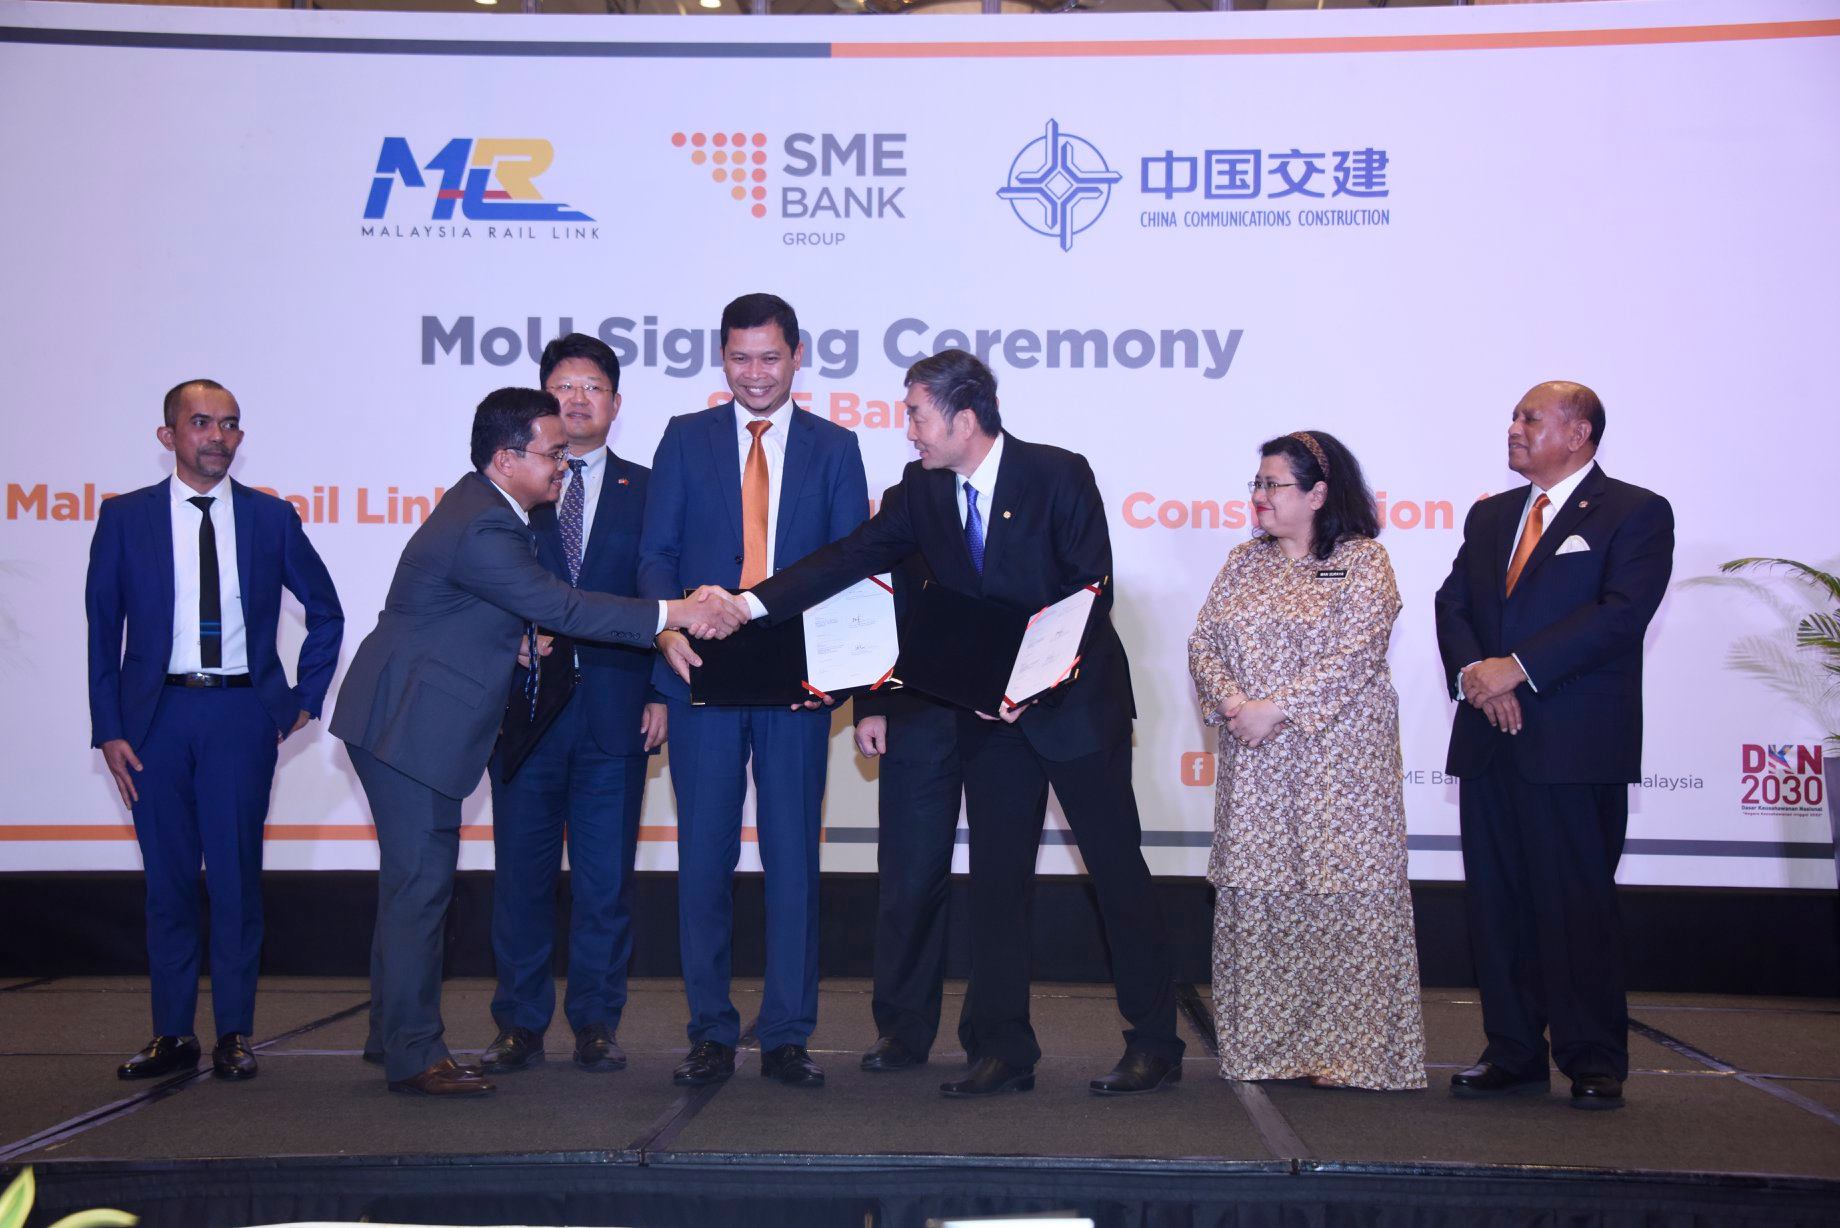 MoU Signing Ceremony SME Bank and Malaysia Rail Link & China Communications Construction (ECRL)